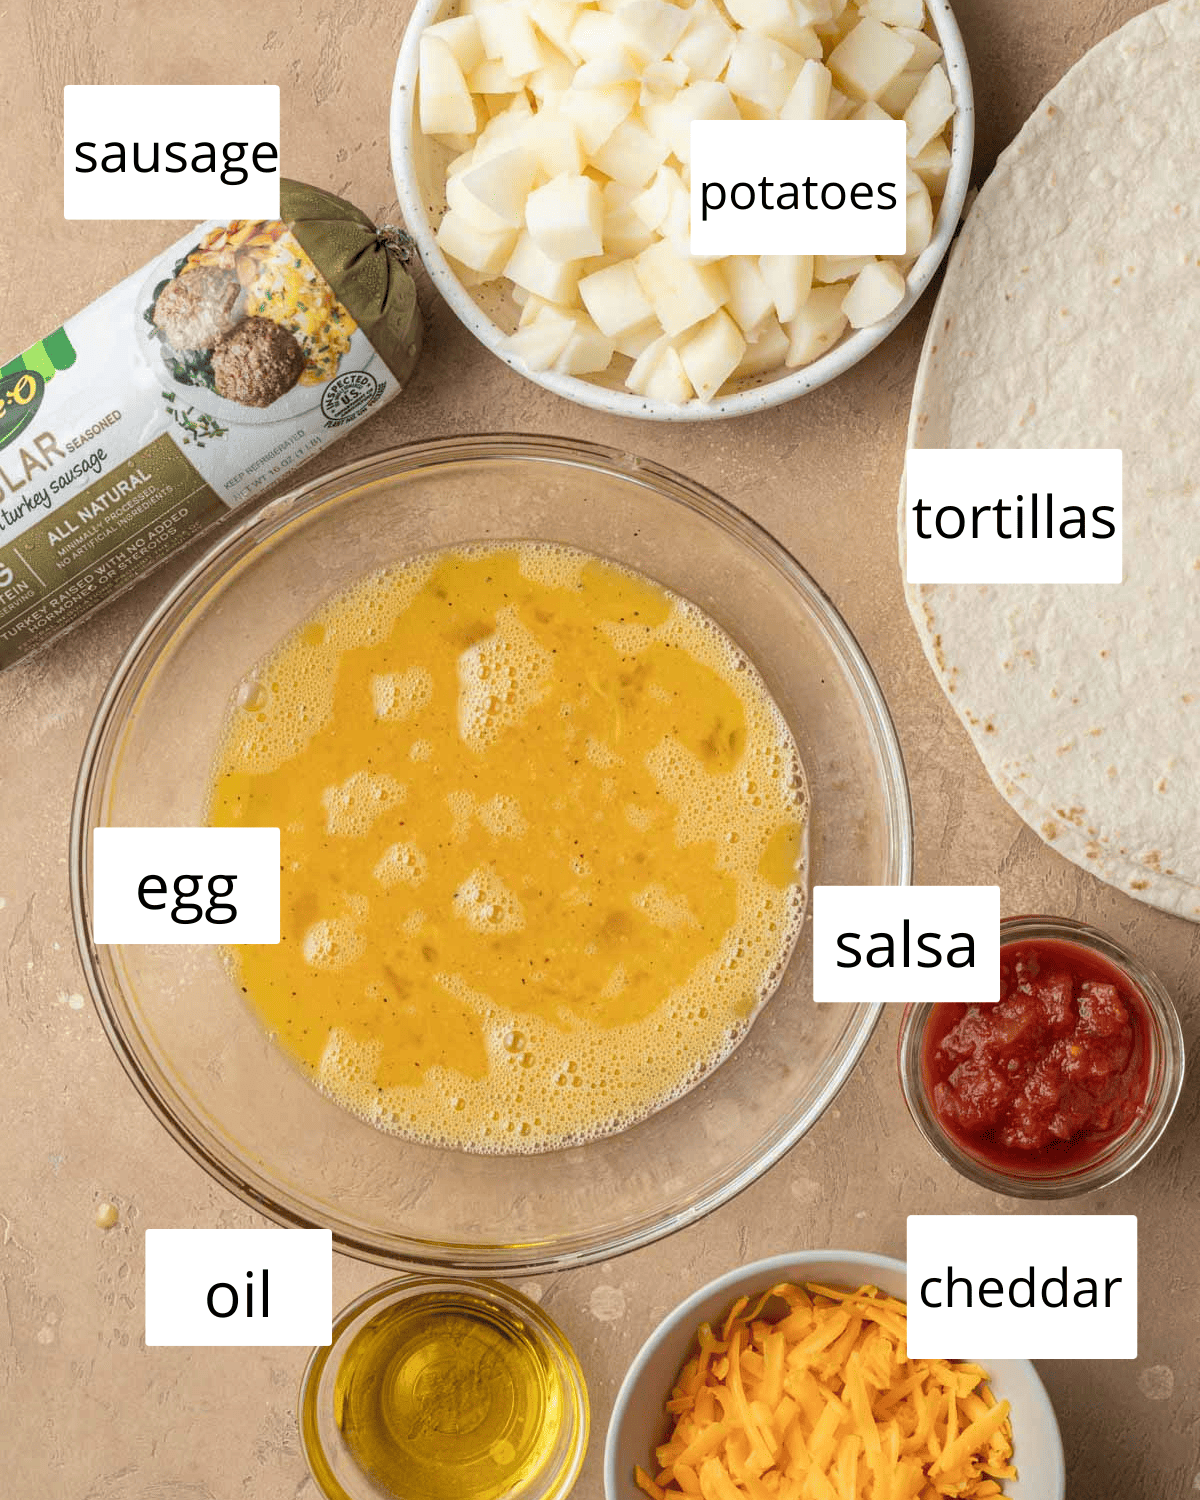 ingredients needed to make potato breakfast burritos laid out on a brown backdrop.